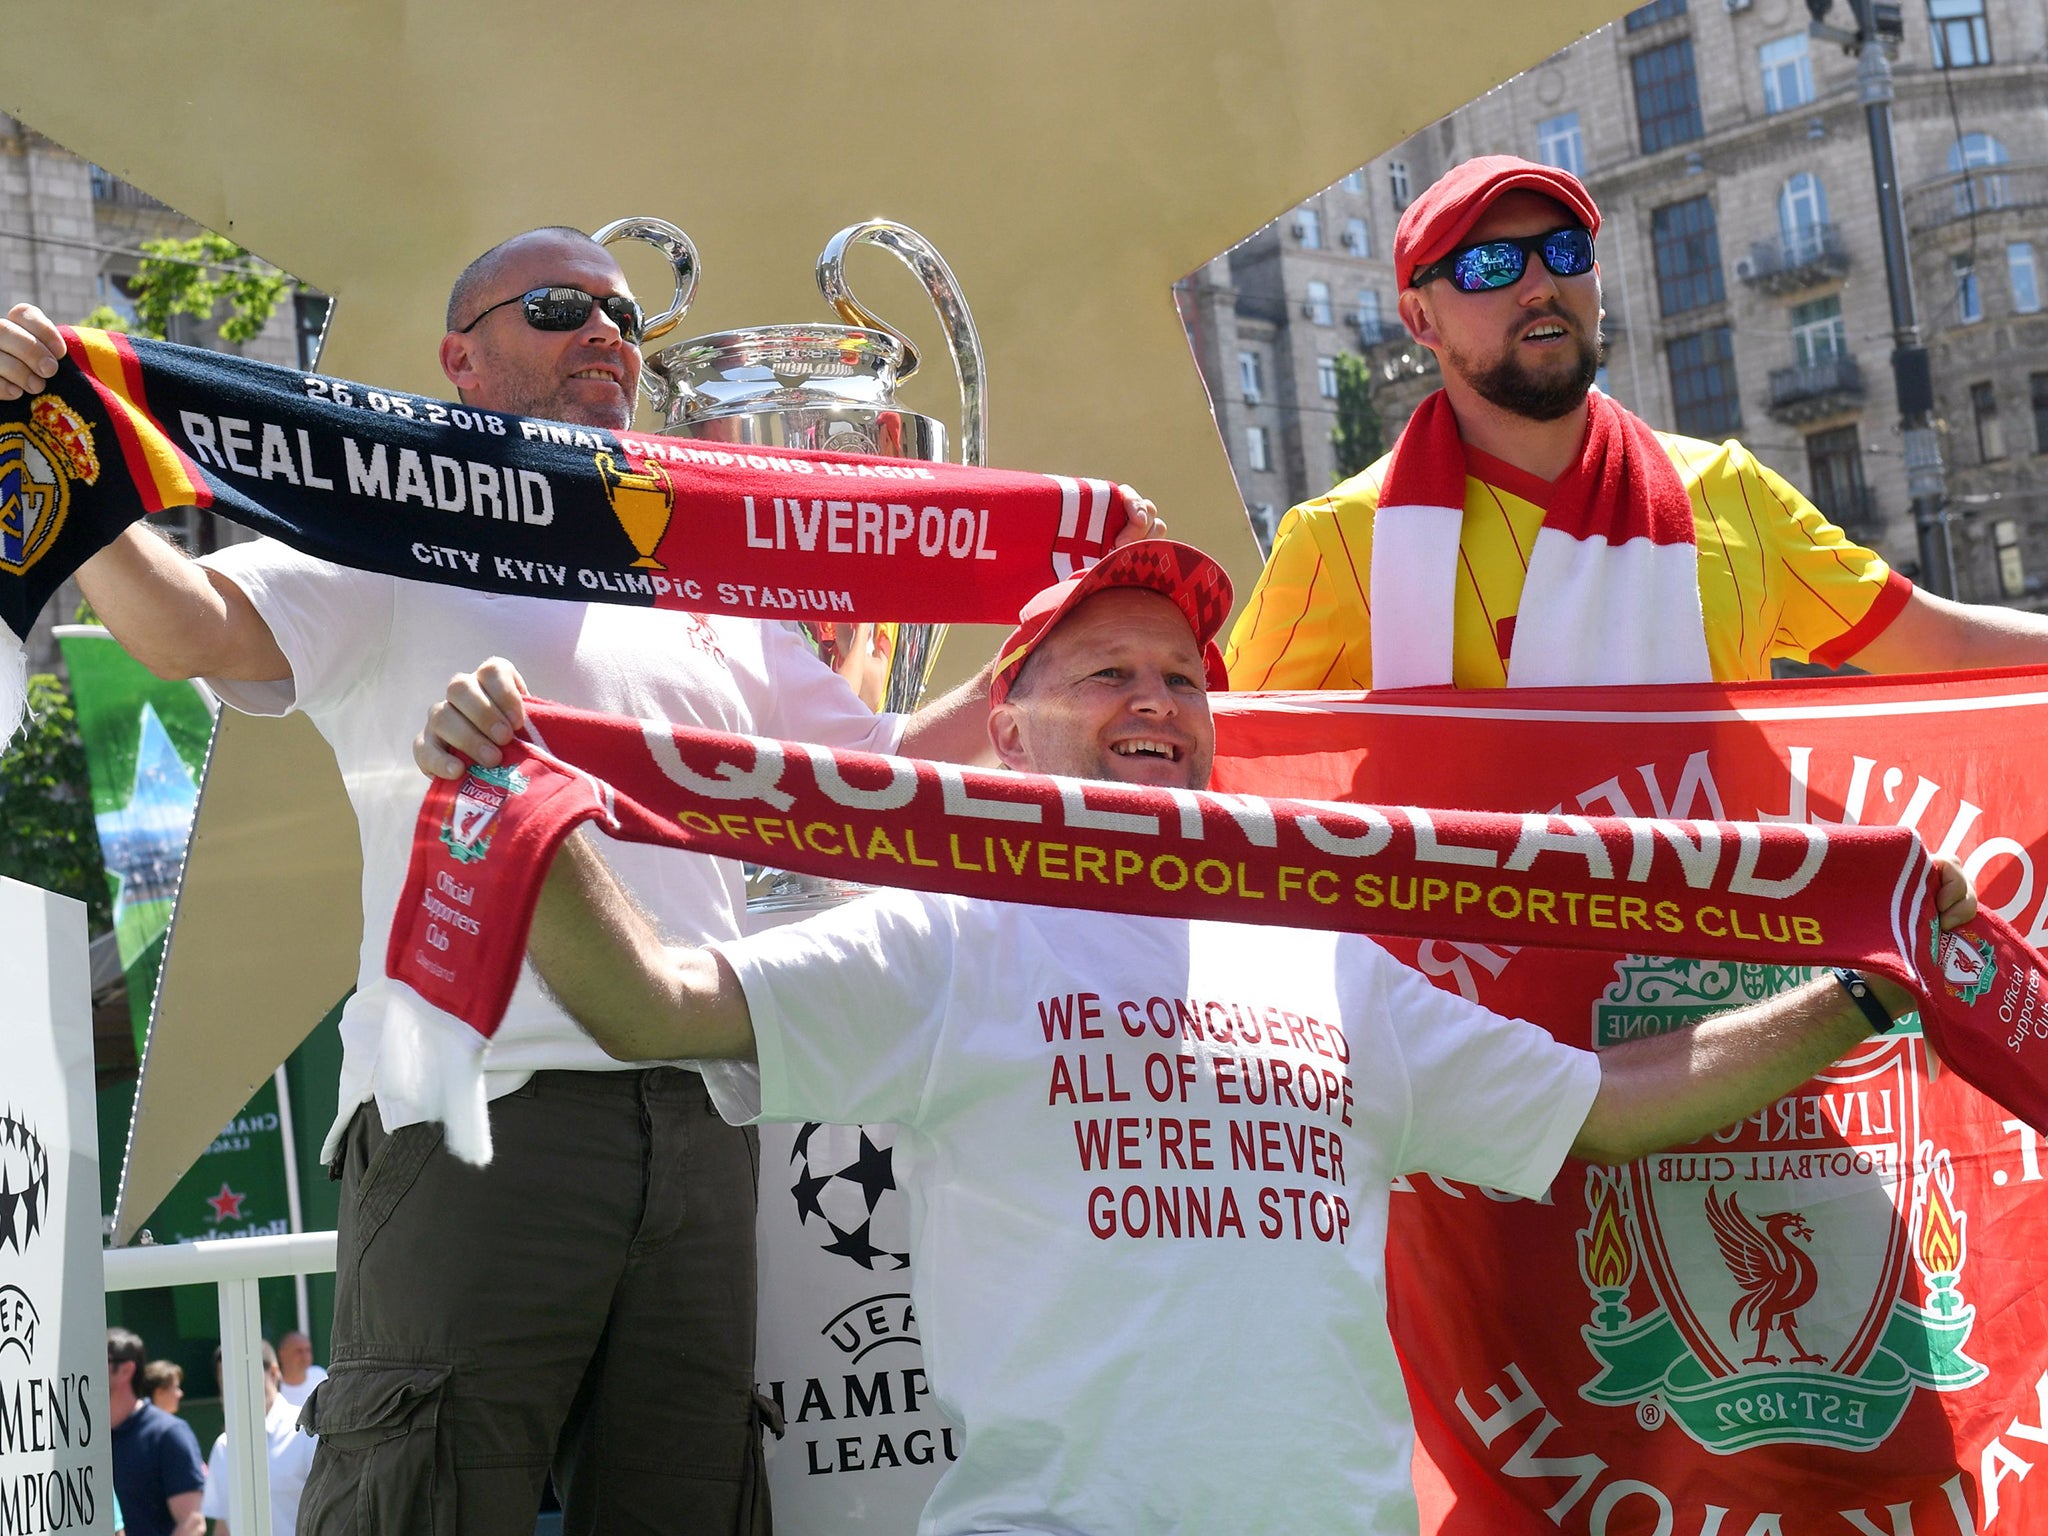 Liverpool fans started to arrive in the Ukraine capital on Thursday ahead of the final